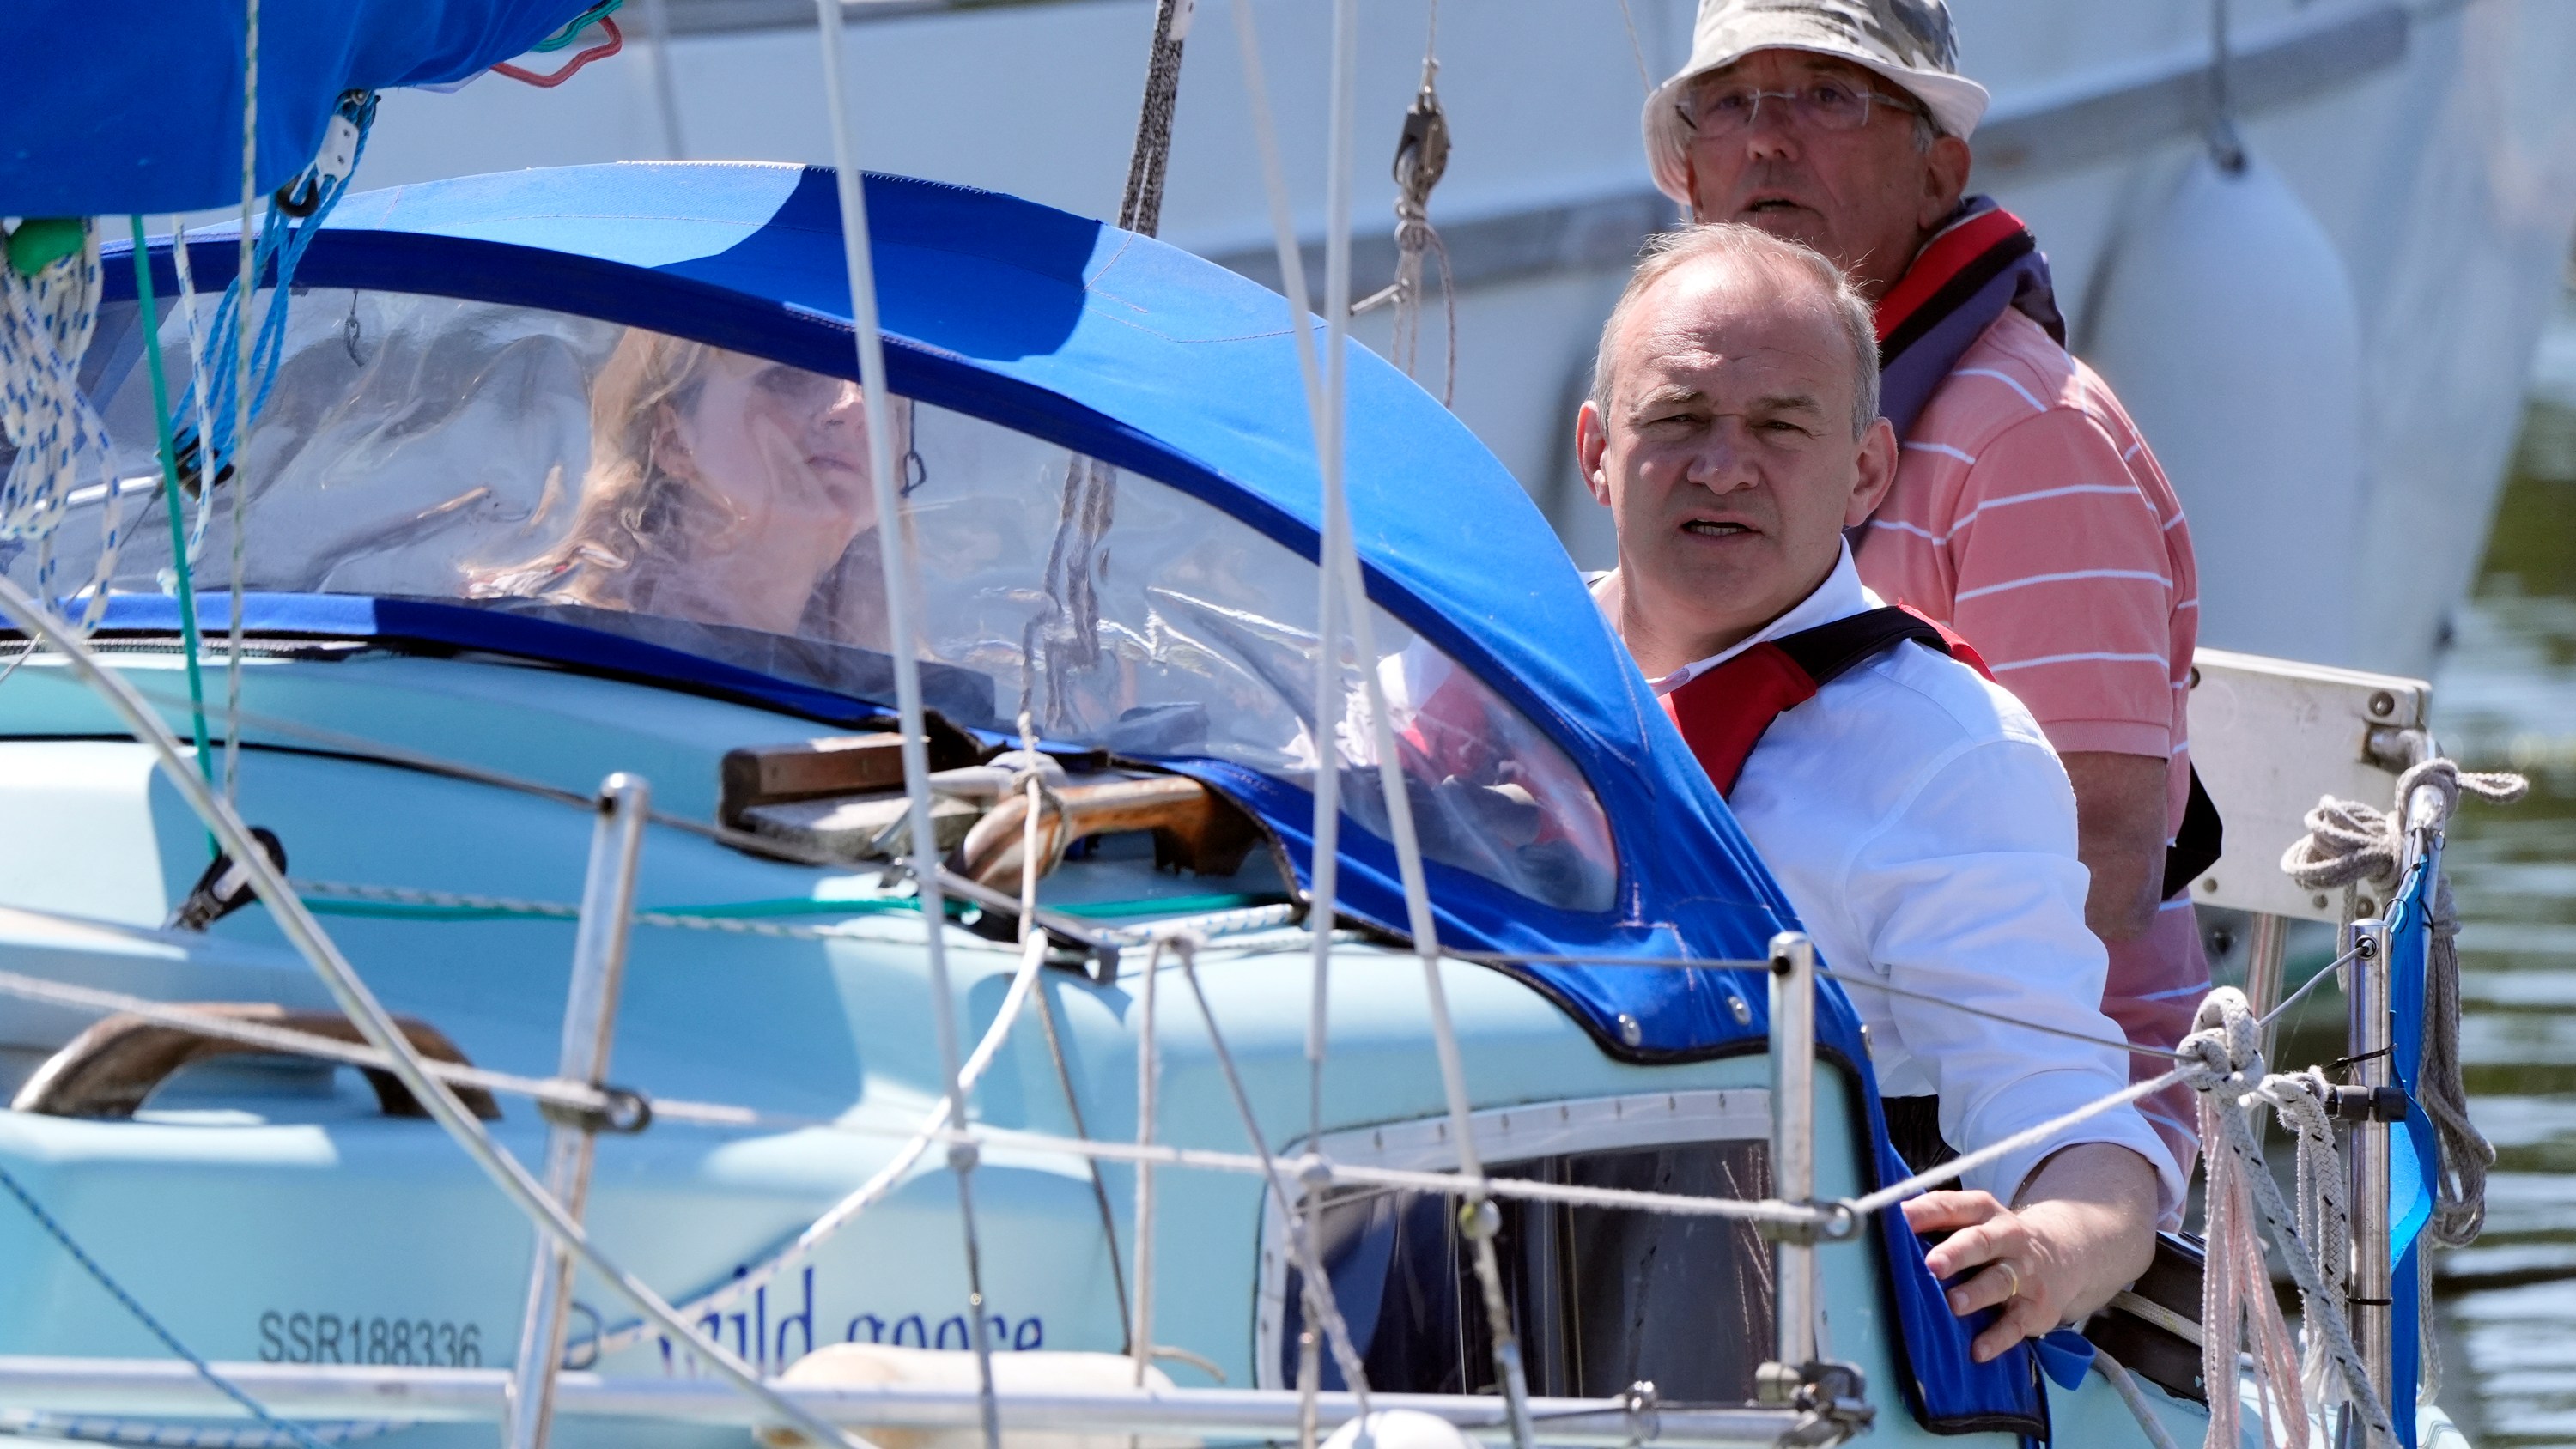 Sir Ed Davey visited the Birdham Pool marina in Chichester on the campaign trail on Saturday. He hopes an orange wave will sweep away the blue wall